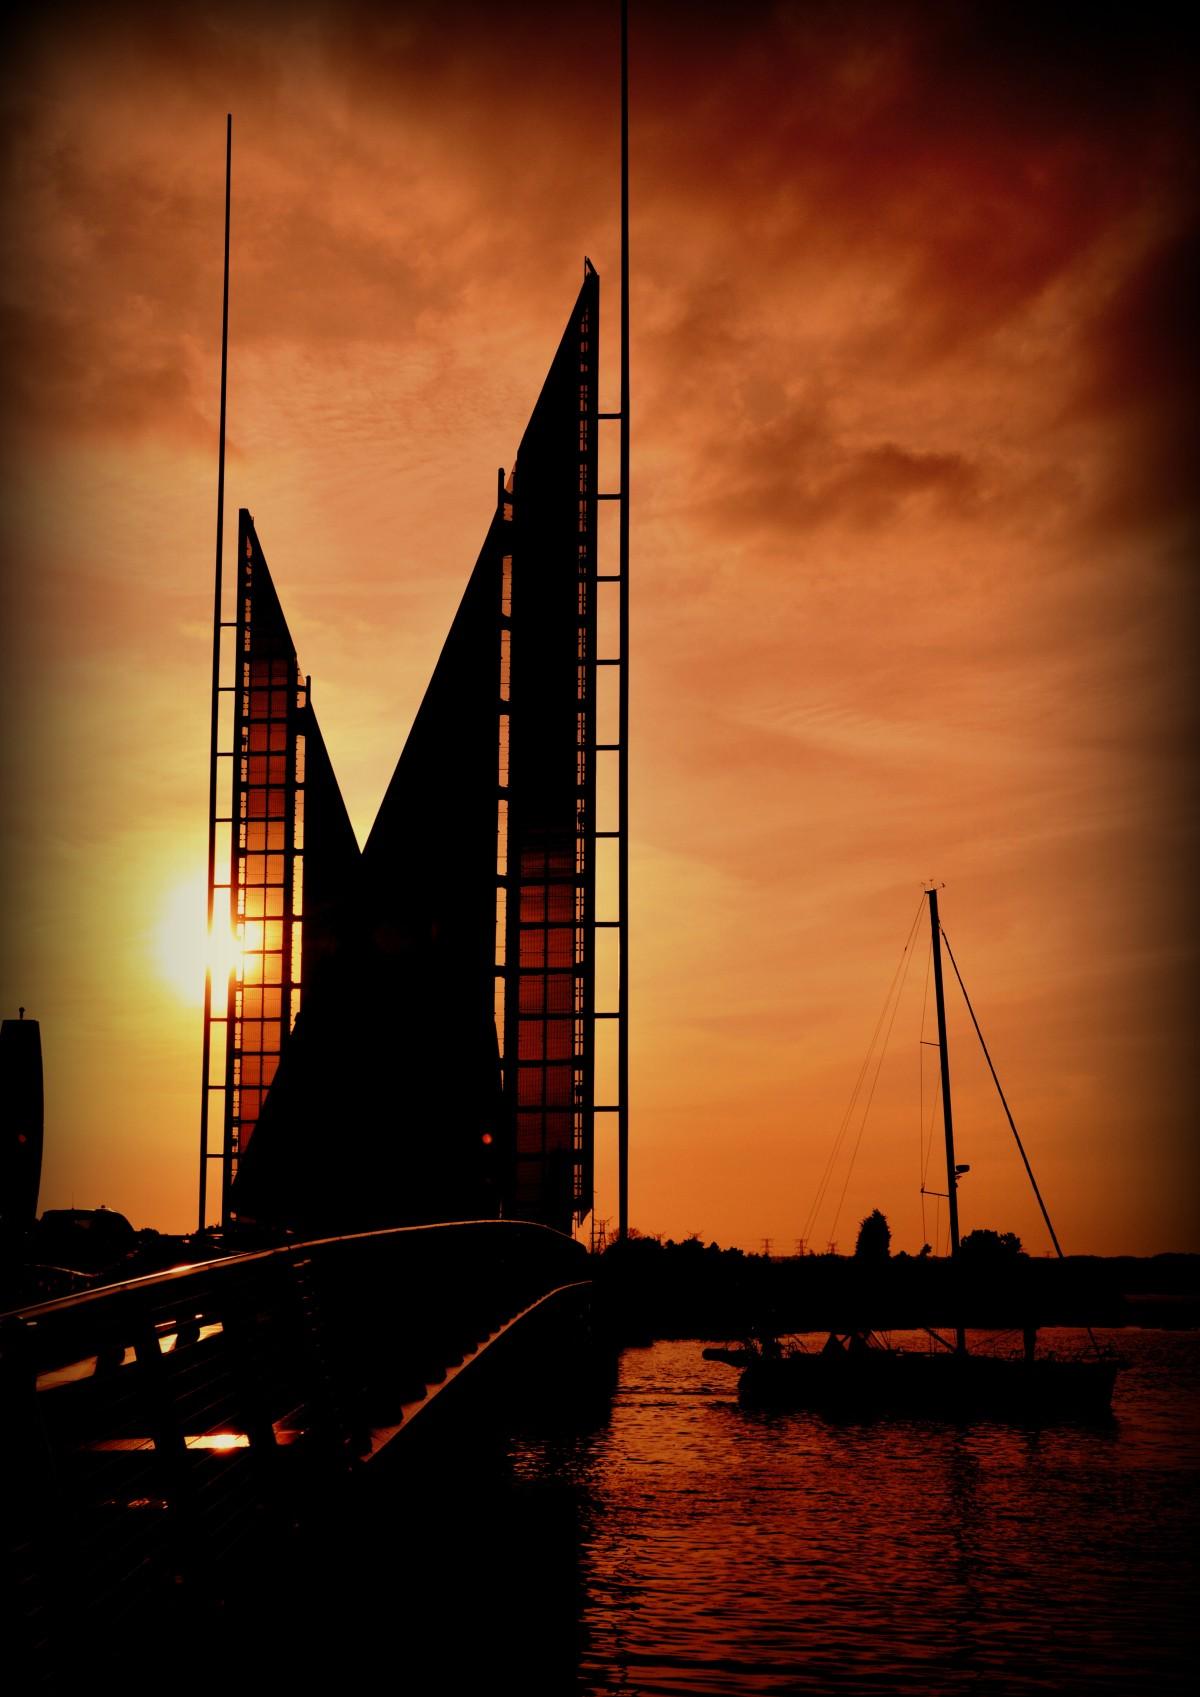 A sunset at the Twin Sails Bridge by Martyn Jenkins